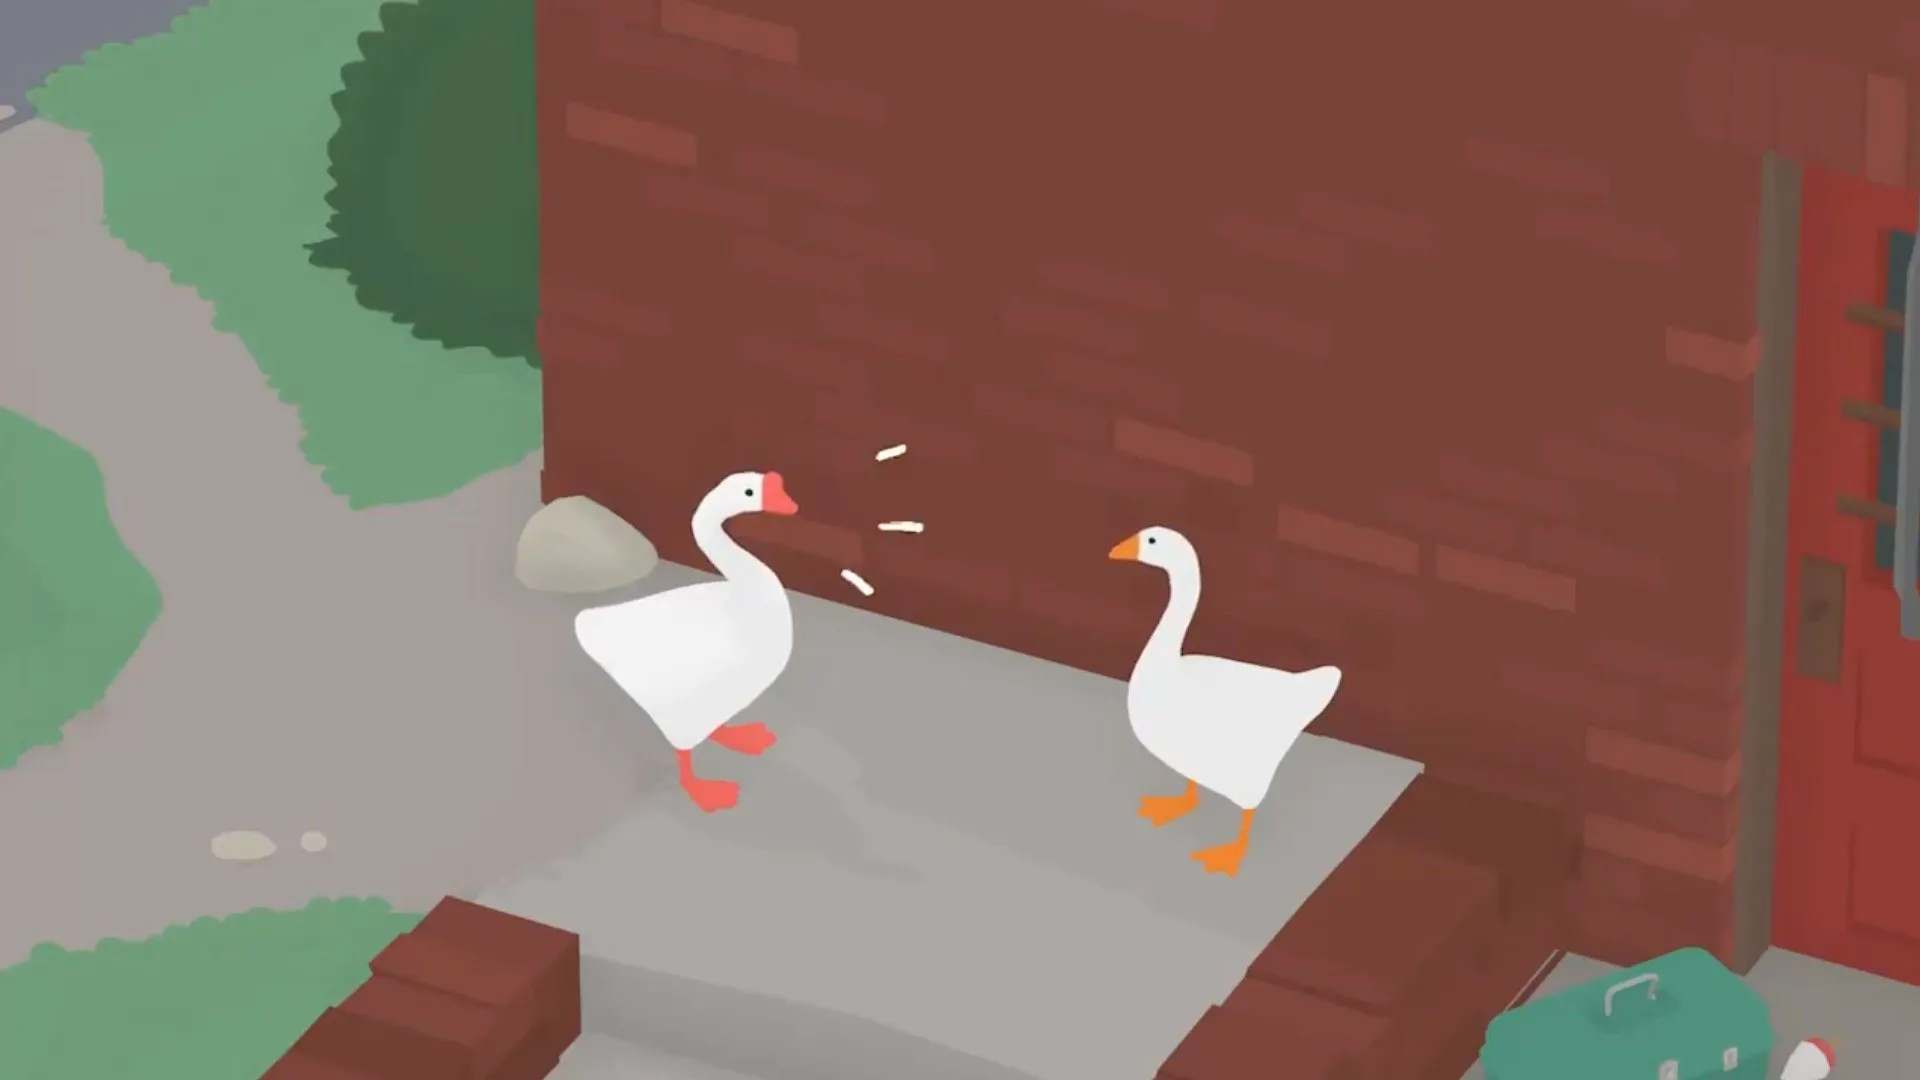 Untitled Goose Game will soon be a two-player joint